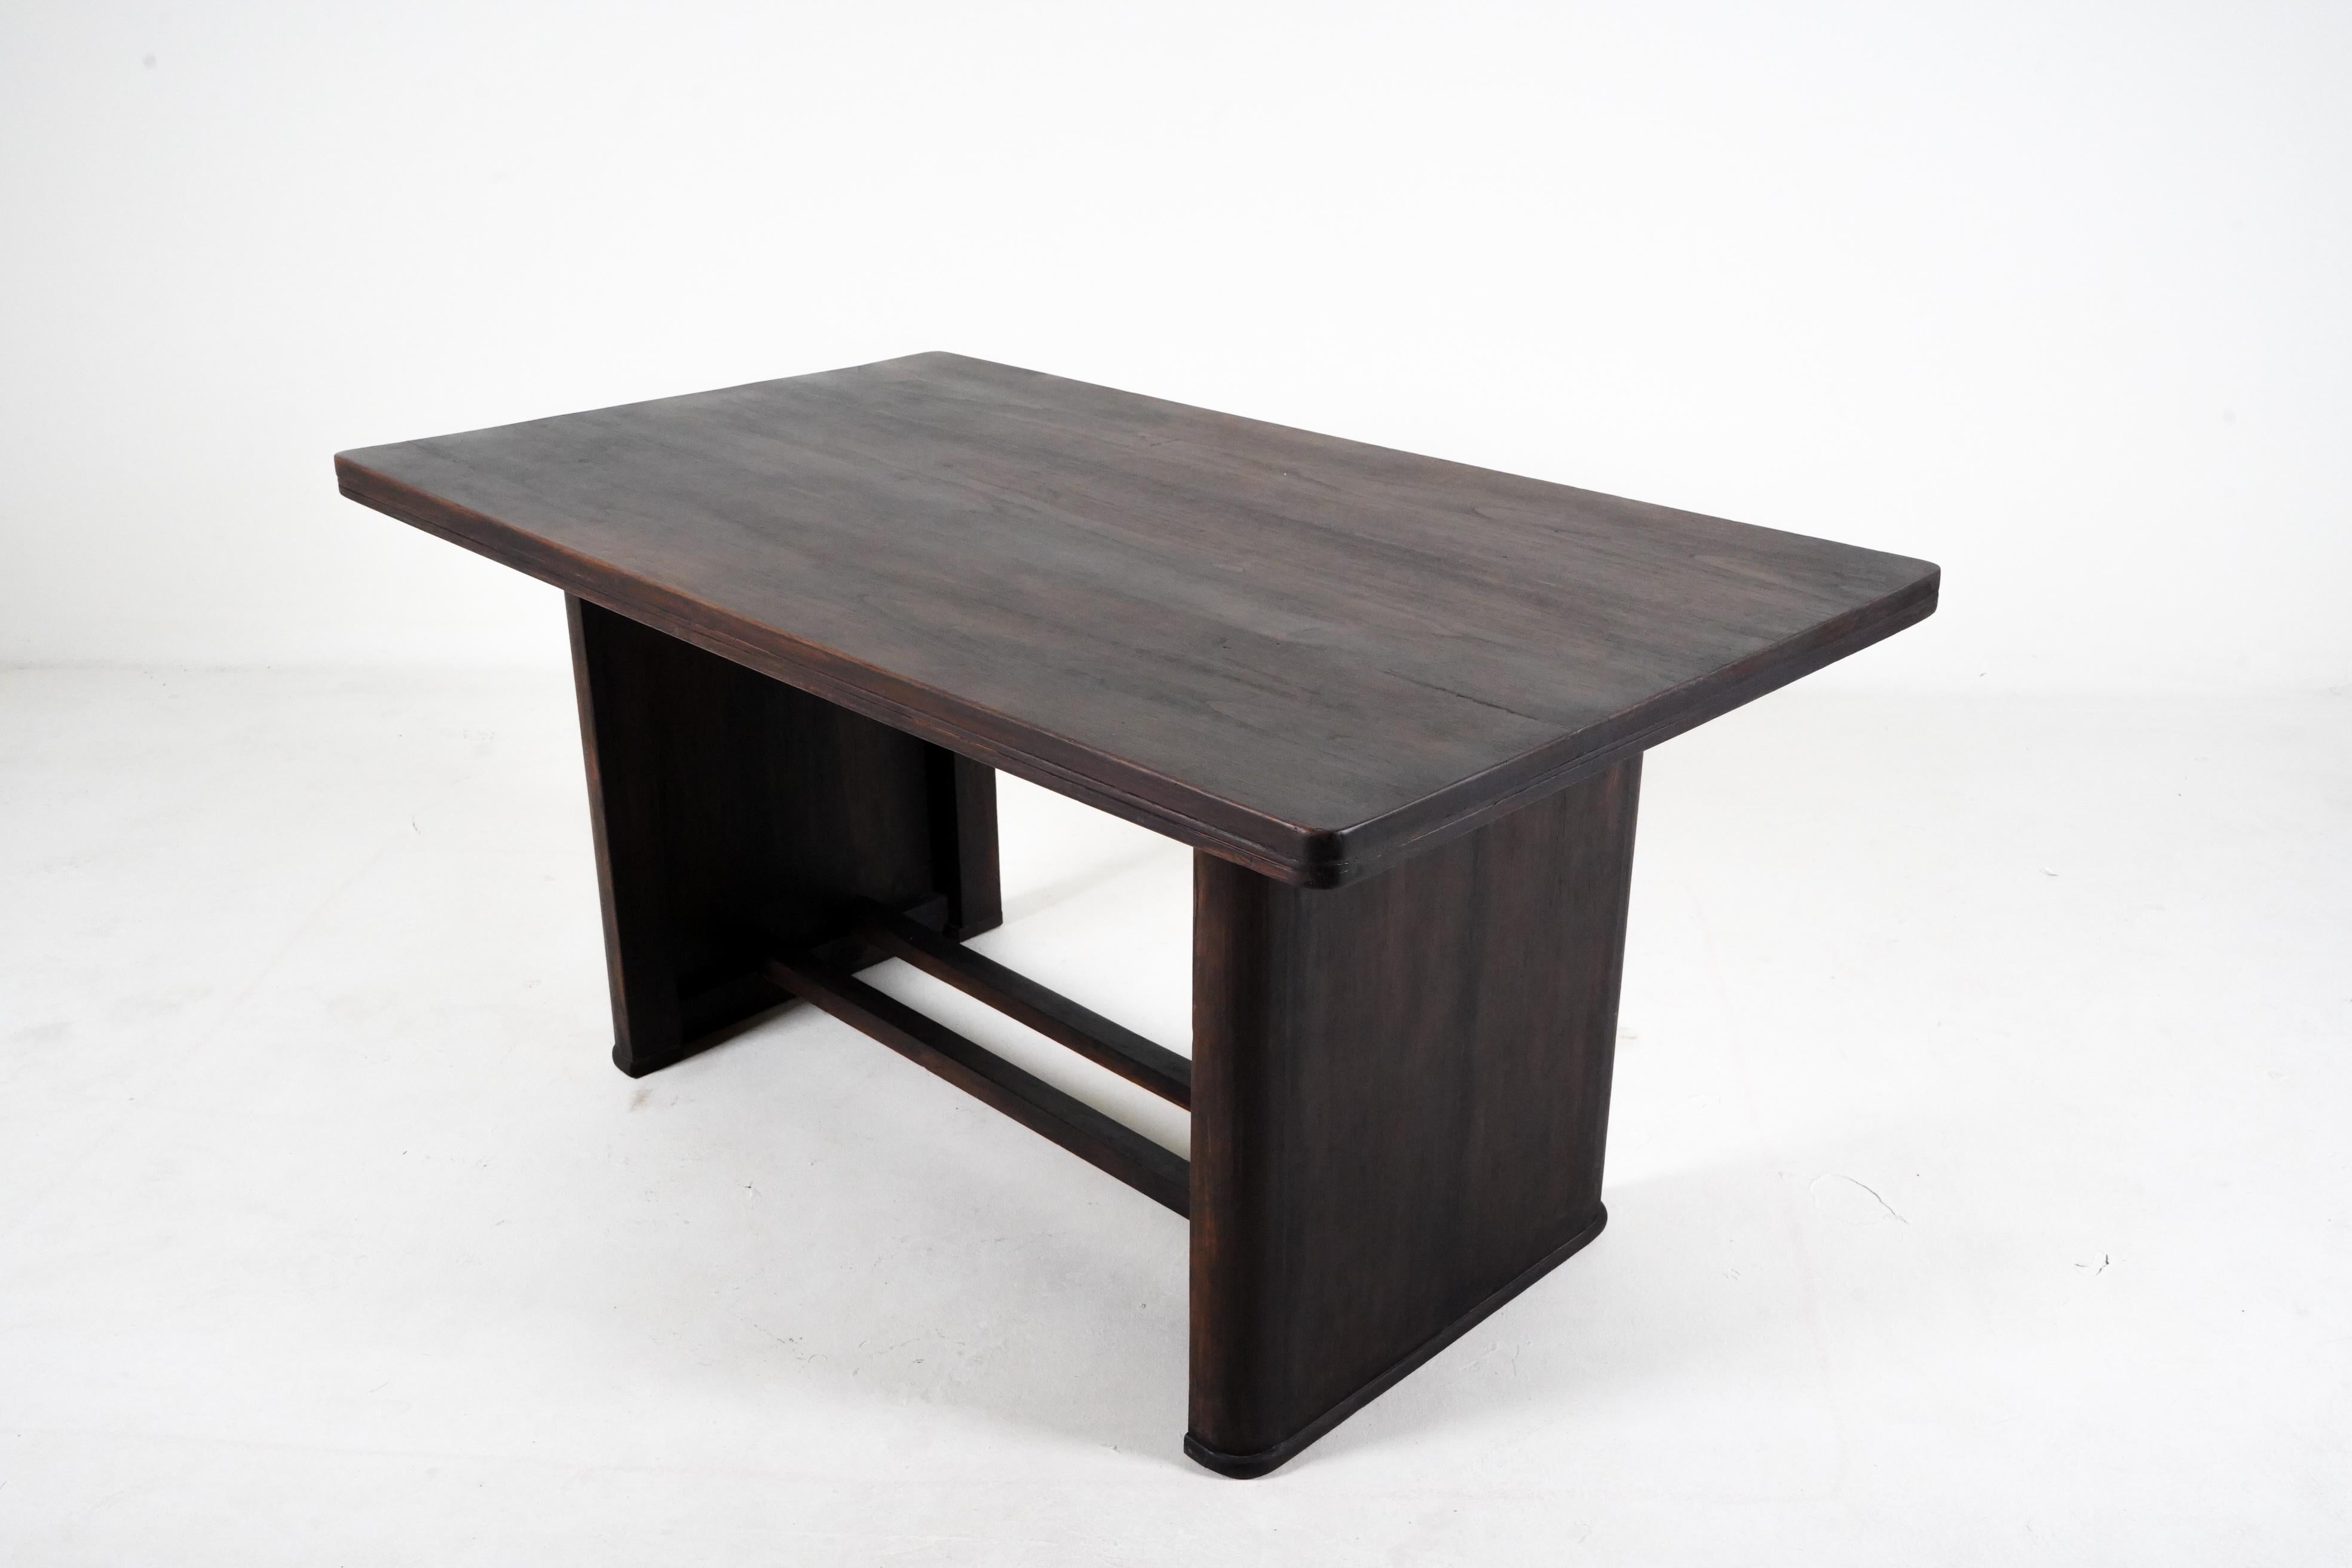 This Burmese Teak Wood Table offers durability and timeless beauty with its vintage craftsmanship and natural patina. The table is unique, made from solid teak wood and lasting for generations.